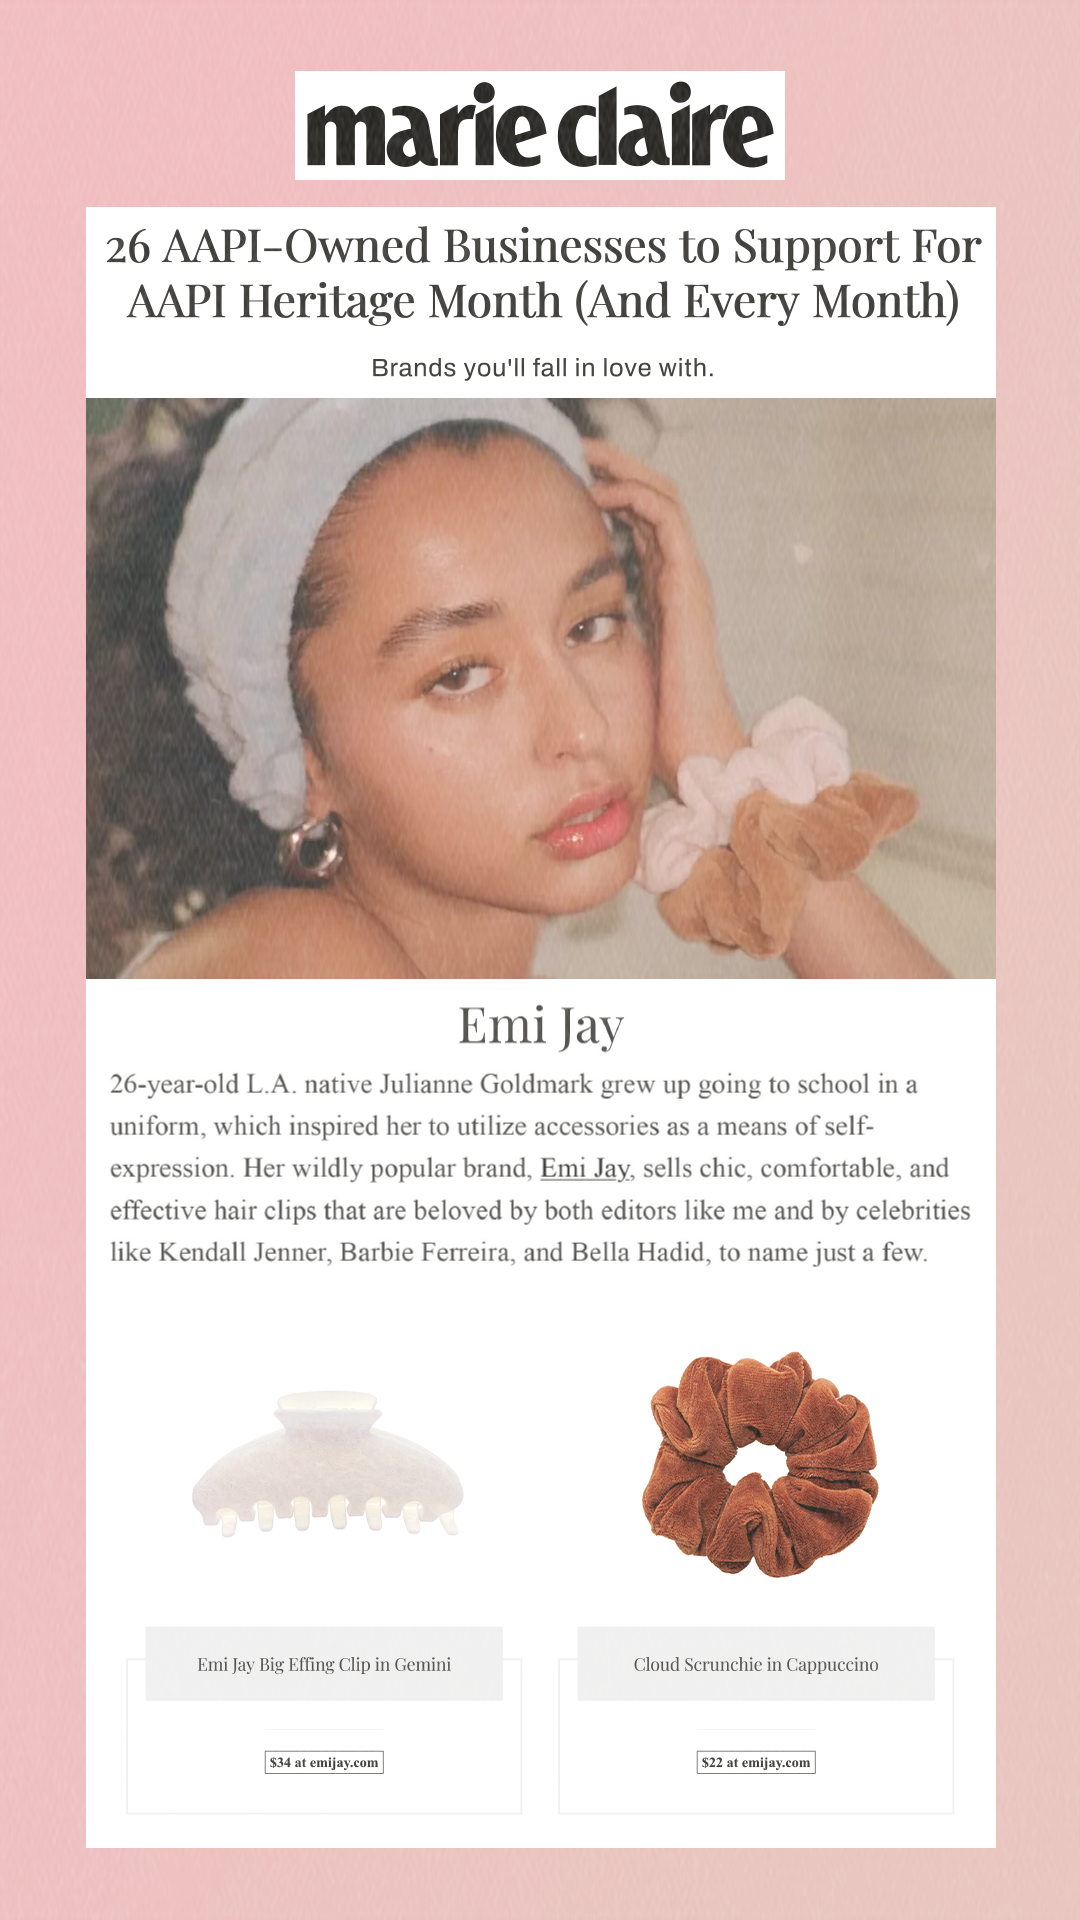 26 AAPI-Owned Businesses to Support For AAPI Heritage Month (And Every Month) Brands you'll fall in love with. Emi Jay 26-year-old L.A. native Julianne Goldmark grew up going to school in a uniform, which inspired her to utilize accessories as a means of self-expression. Her wildly popular brand, Emi Jay, sells chic, comfortable, and effective hair clips that are beloved by both editors like me and by celebrities like Kendall Jenner, Barbie Ferreira, and Bella Hadid, to name just a few. Emi Jay Big Effing Clip in Gemini Cloud Scrunchie in Cappuccino